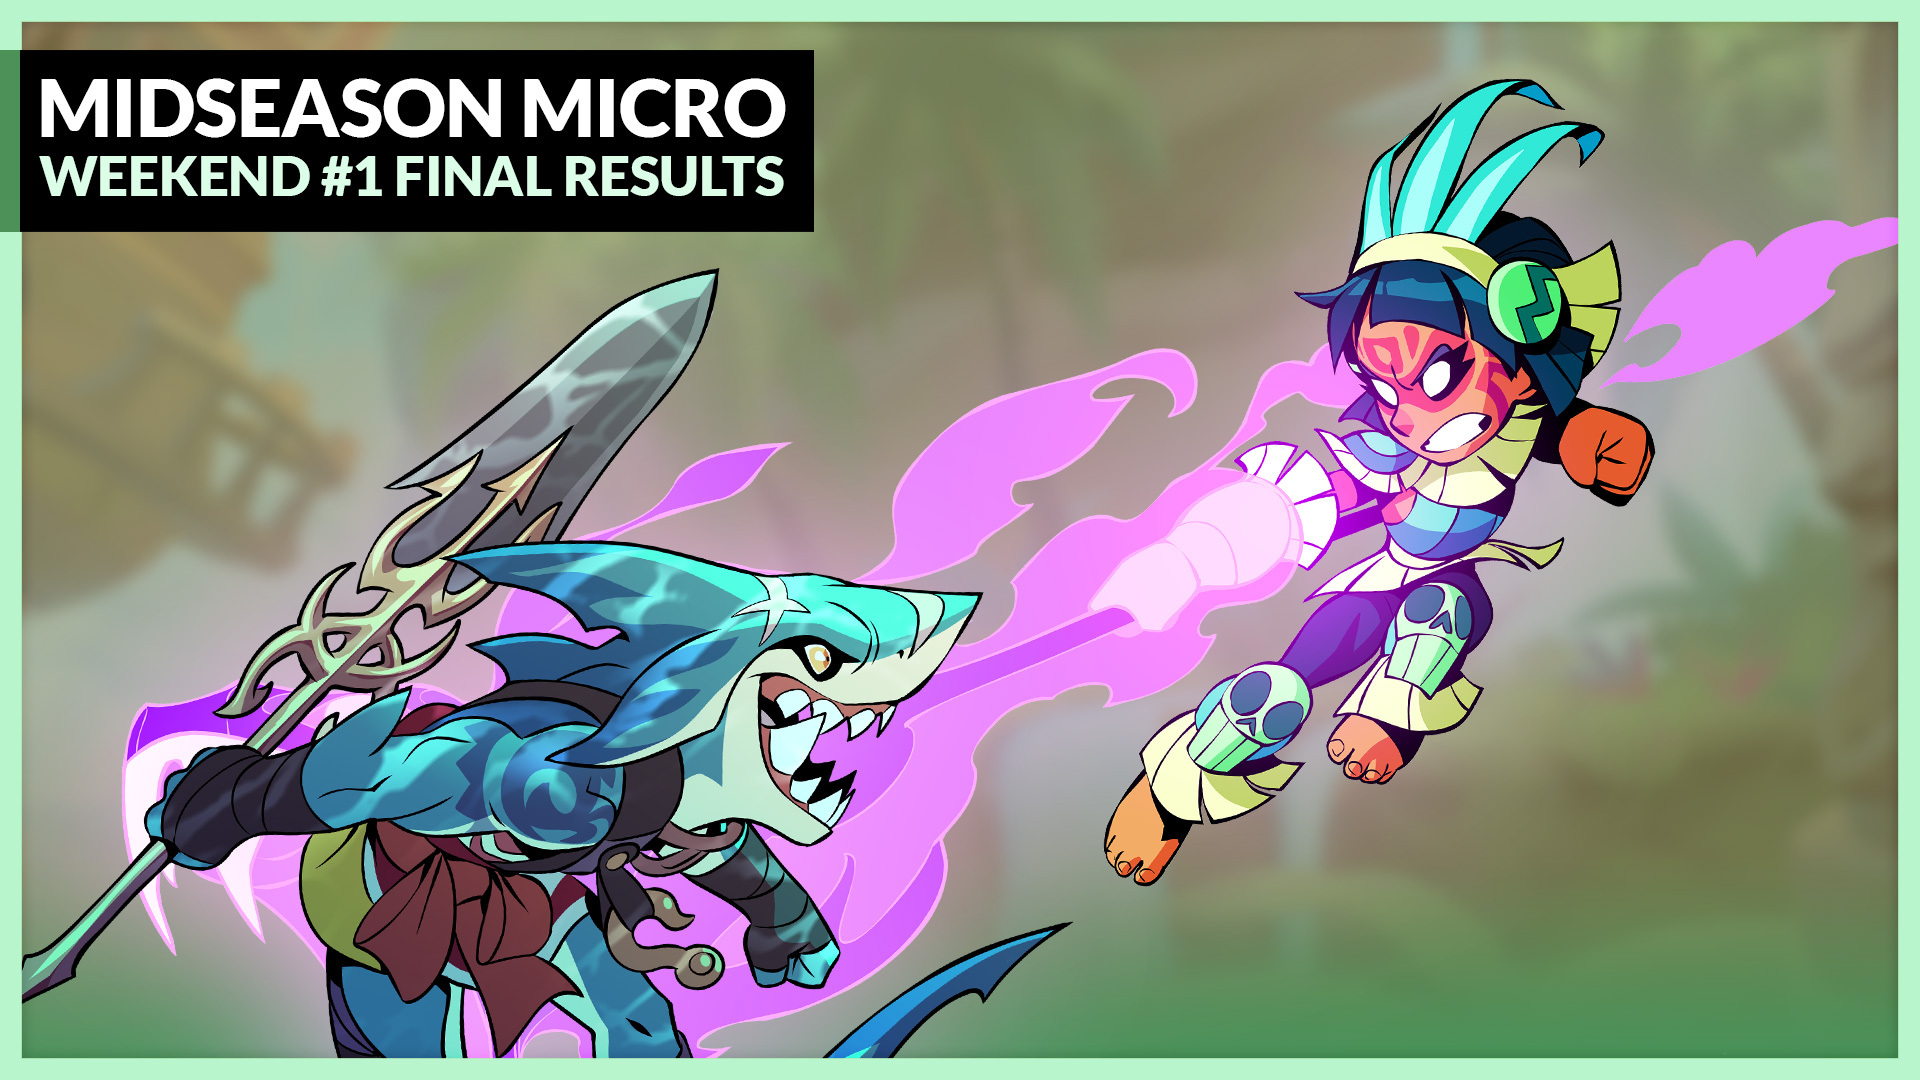 Java Stomps on the Competition in the Midseason Micro #1